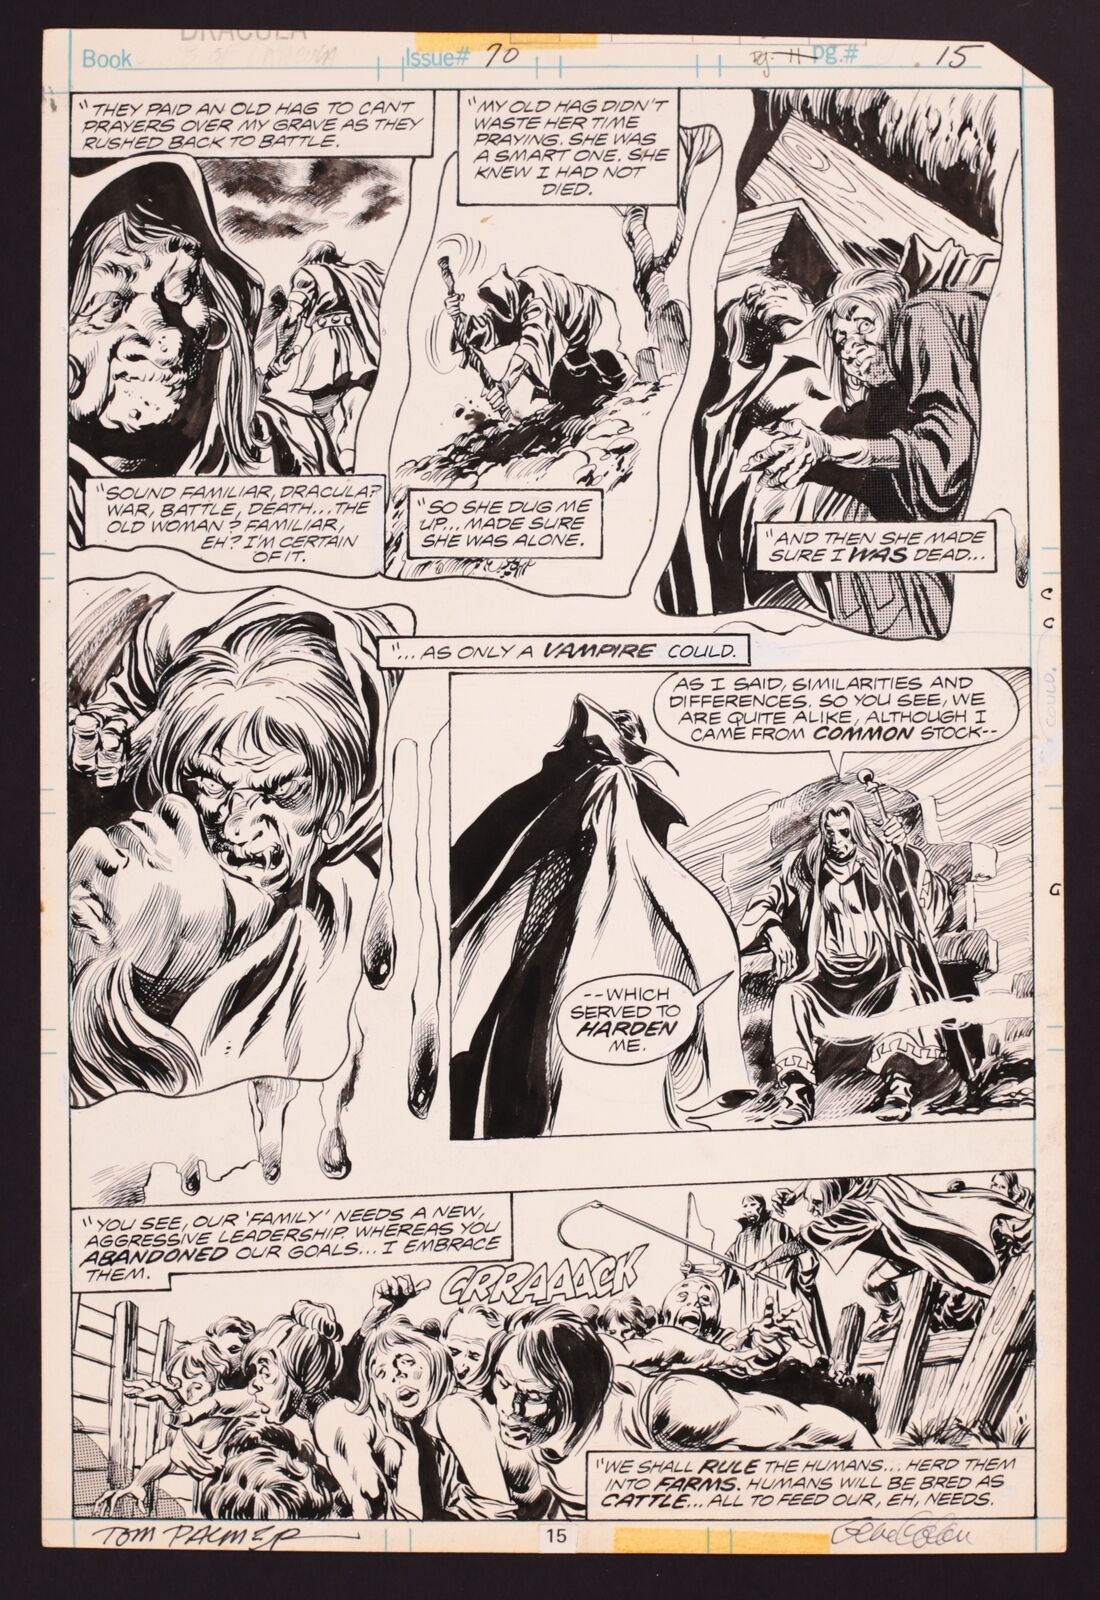 Original Art from Tomb of Dracula #70 (1979) Pg 15 by Gene Colan & Tom Palmer